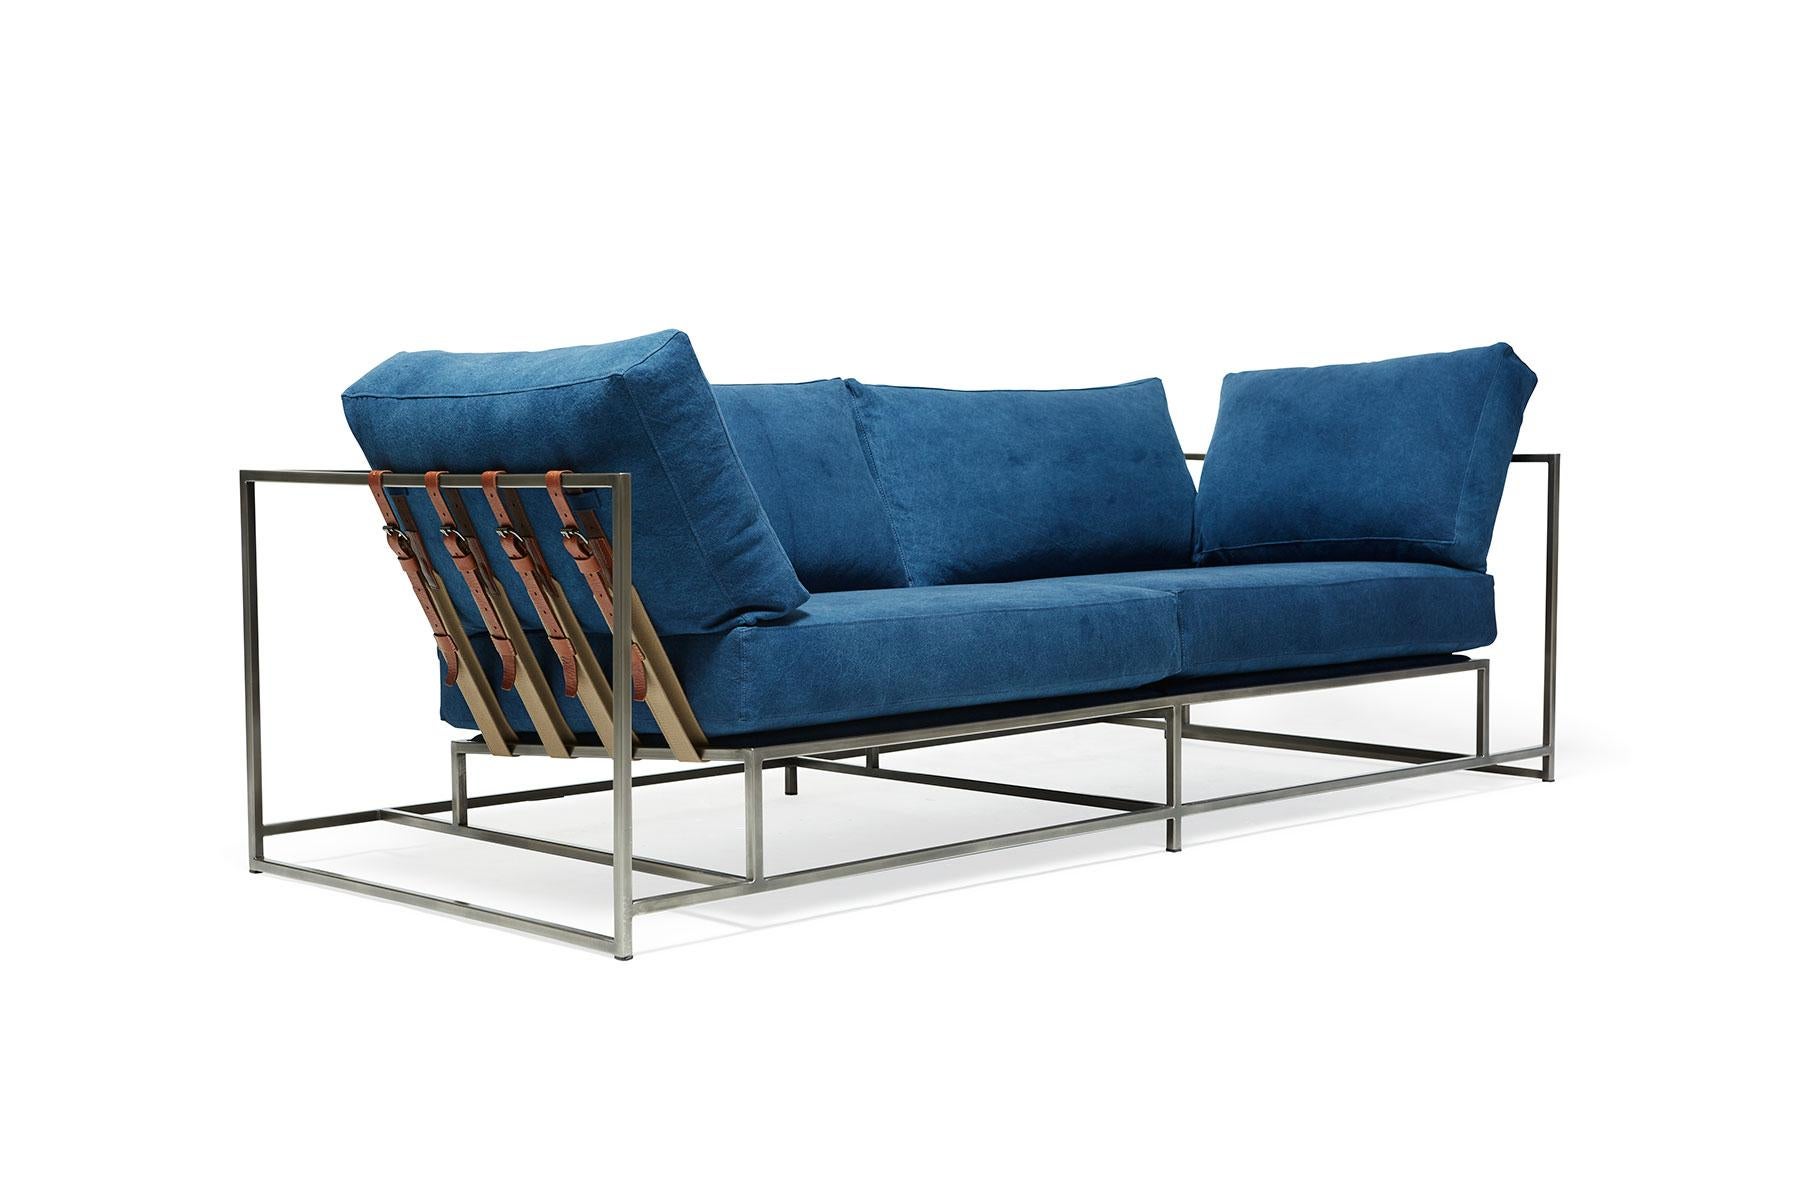 The Inheritance Two Seat Sofa by Stephen Kenn is as comfortable as it is unique. The design features an exposed construction composed of three elements - a steel frame, plush upholstery, and supportive belts. The deep seating area is perfect for a